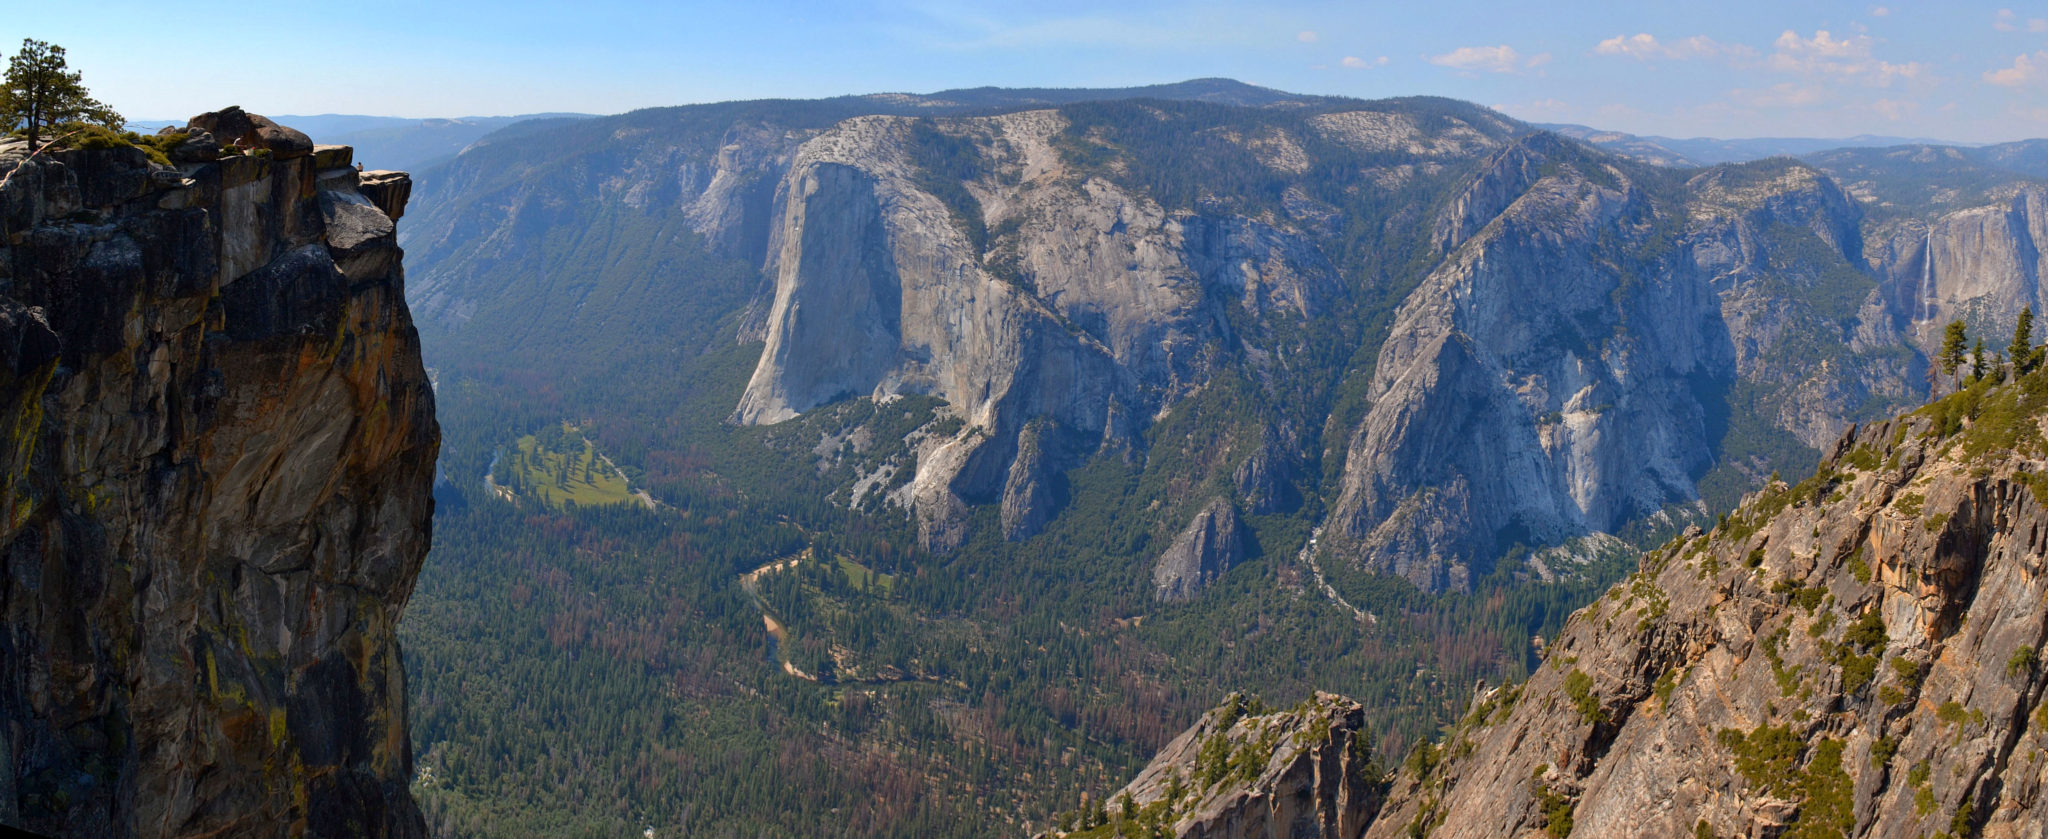 Panoramic view of Yosemite Valley from Taft Point